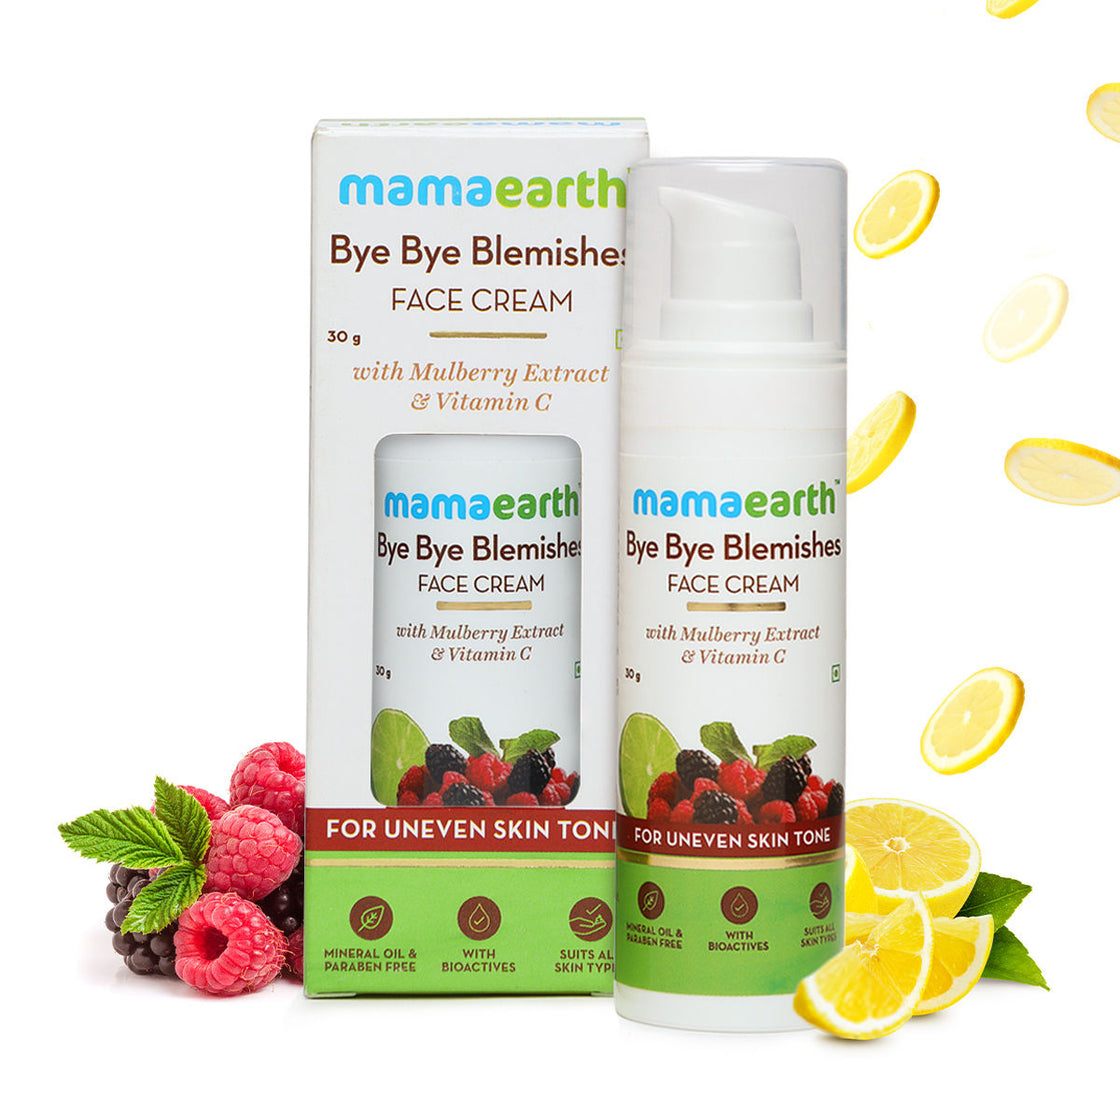 Mamaearth Bye Bye Blemishes Face Cream With Mulberry Extract & Vitamin C